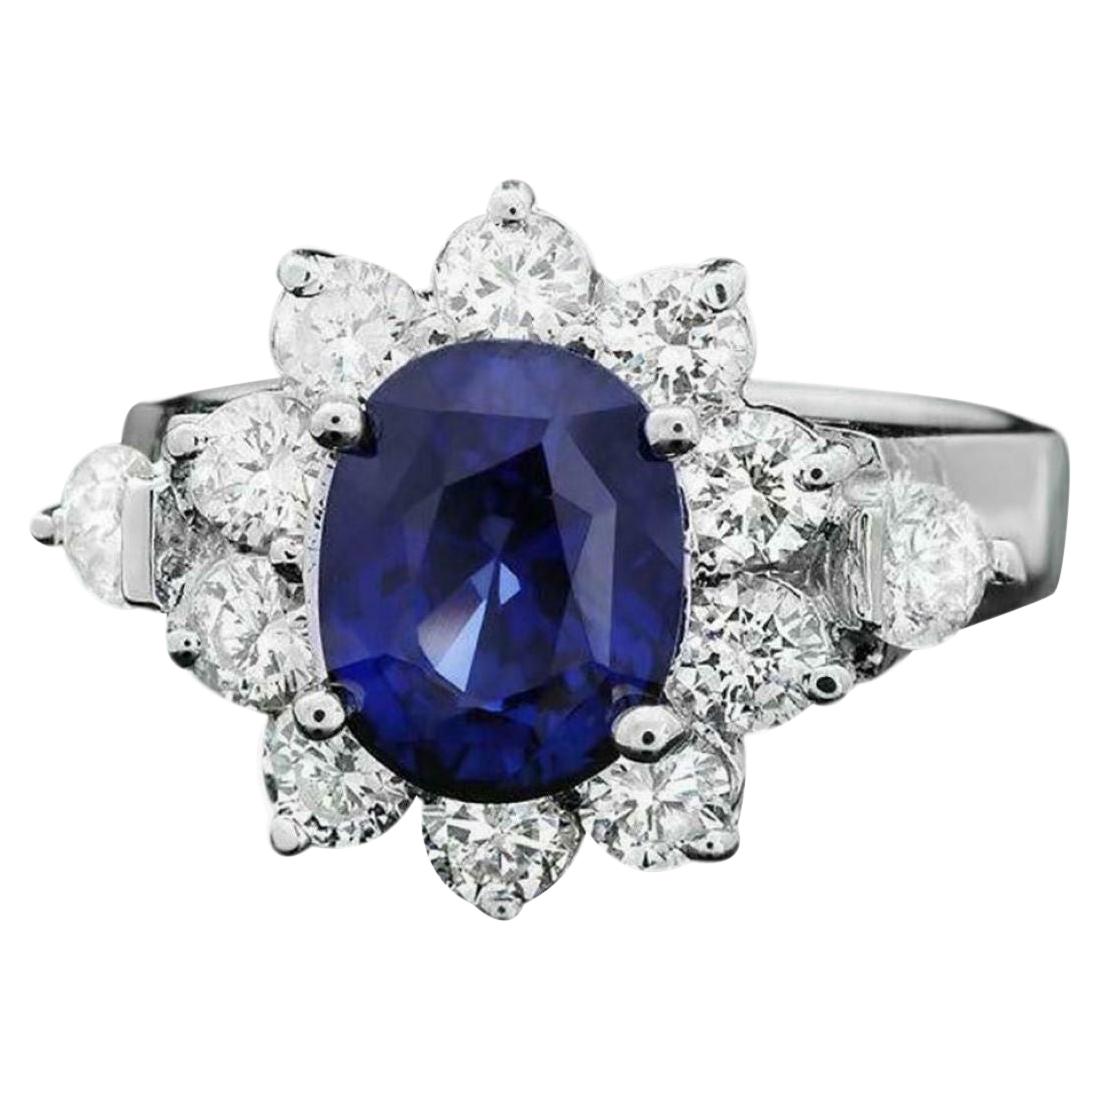 4.70 Carat Exquisite Natural Blue Sapphire and Diamond 14 Karat Solid White Gold For Sale